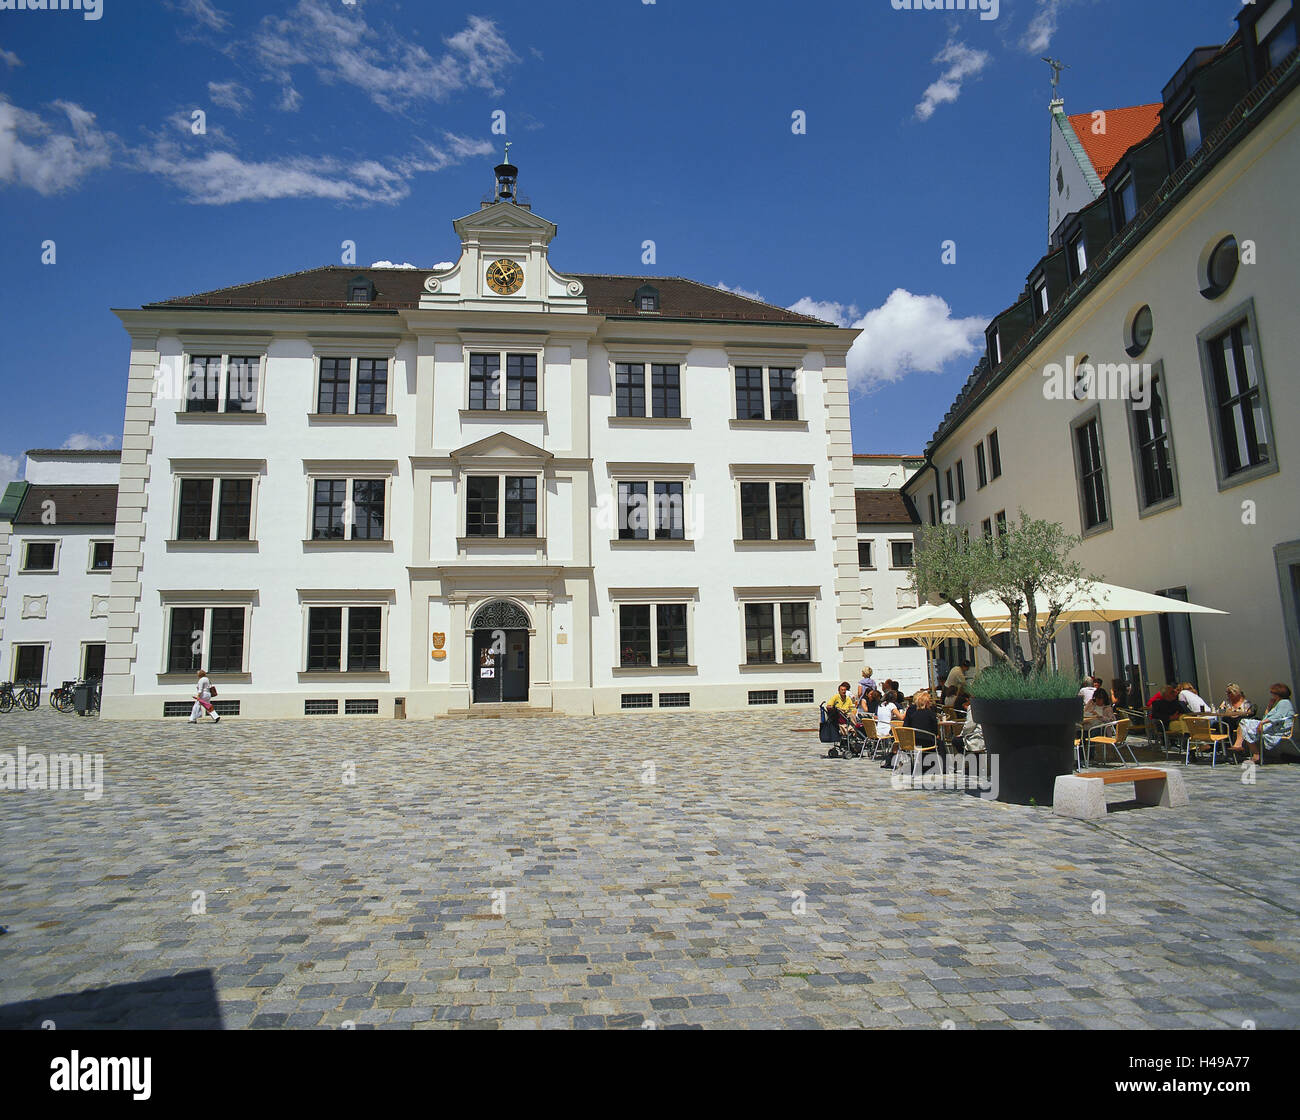 Germany, Bavaria, Augsburg, Anna's court, summer, Swabian, town, Renaissance building, contact point, architectural style Renaissance, building, historically, ecclesiastically, Protestant, place of interest, cafe, person, guests, cloudy sky, Stock Photo